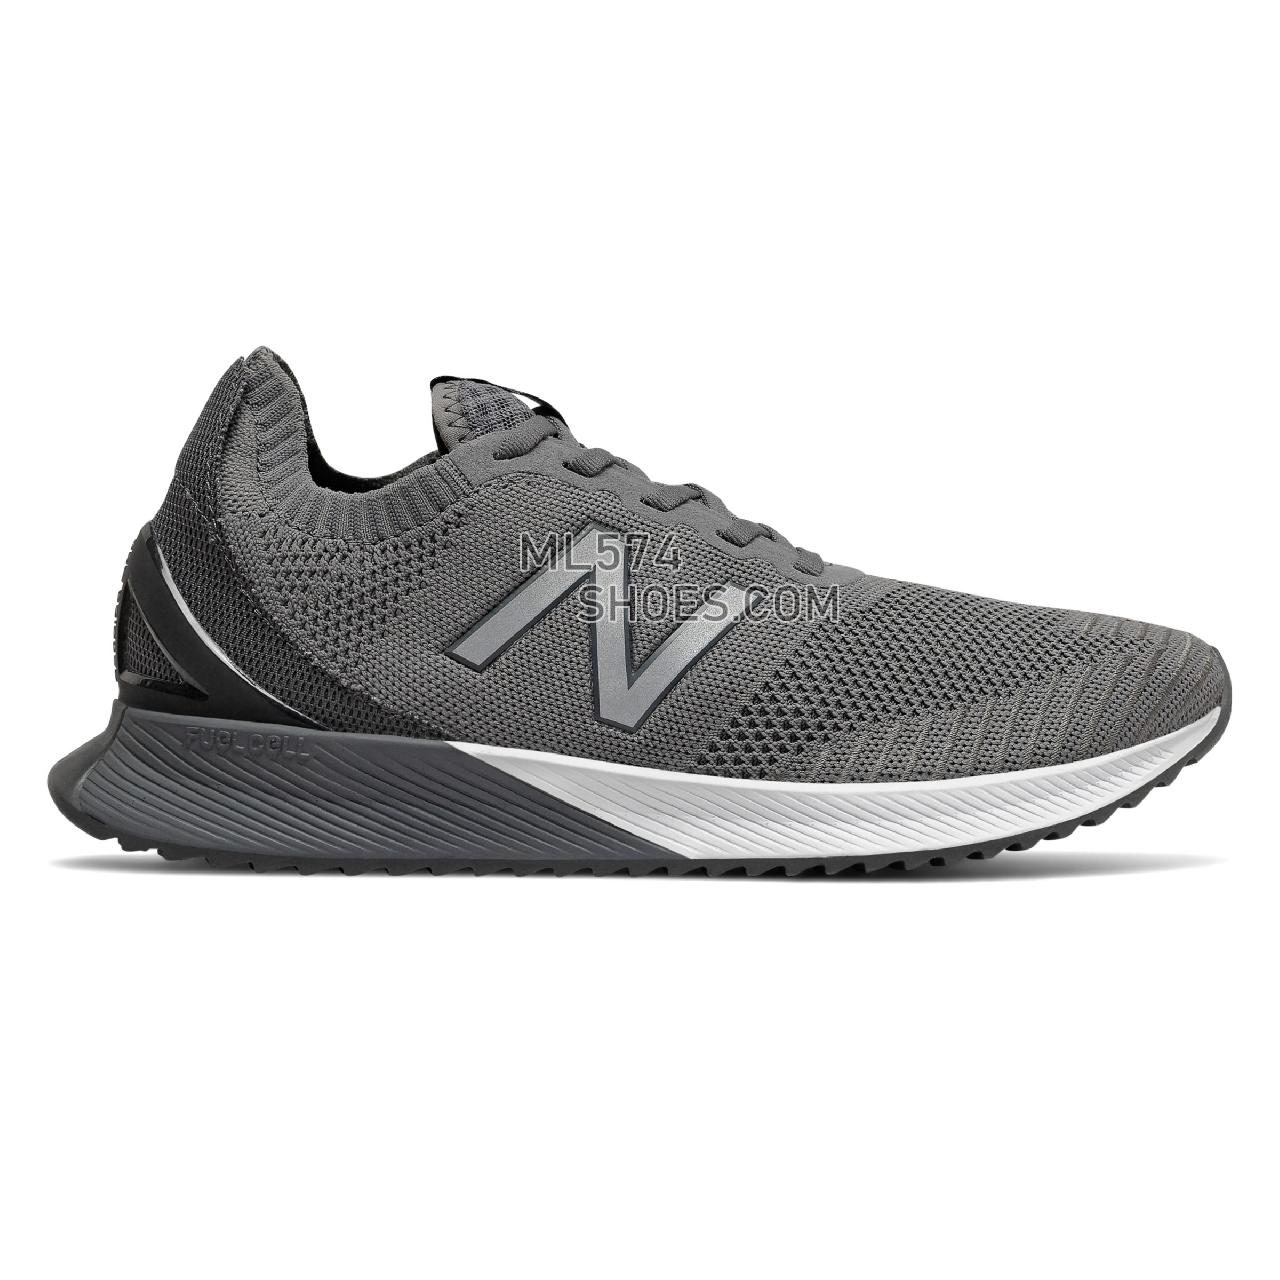 New Balance FuelCell Echo - Men's Neutral Running - Castlerock with Magnet - MFCECCY